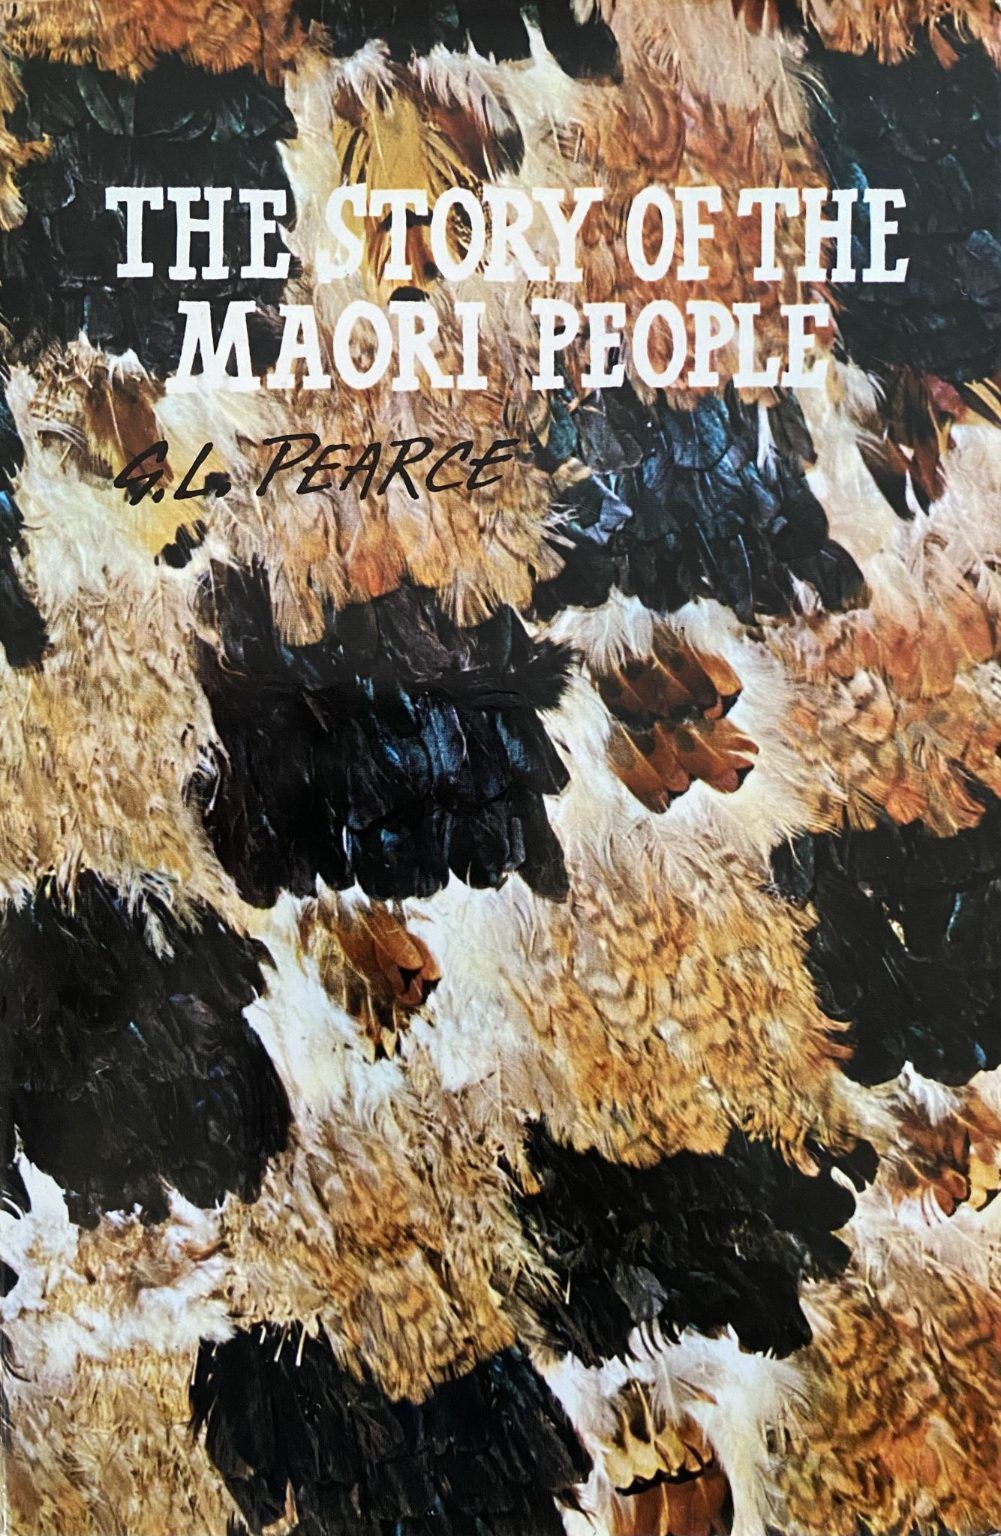 THE STORY OF THE MAORI PEOPLE